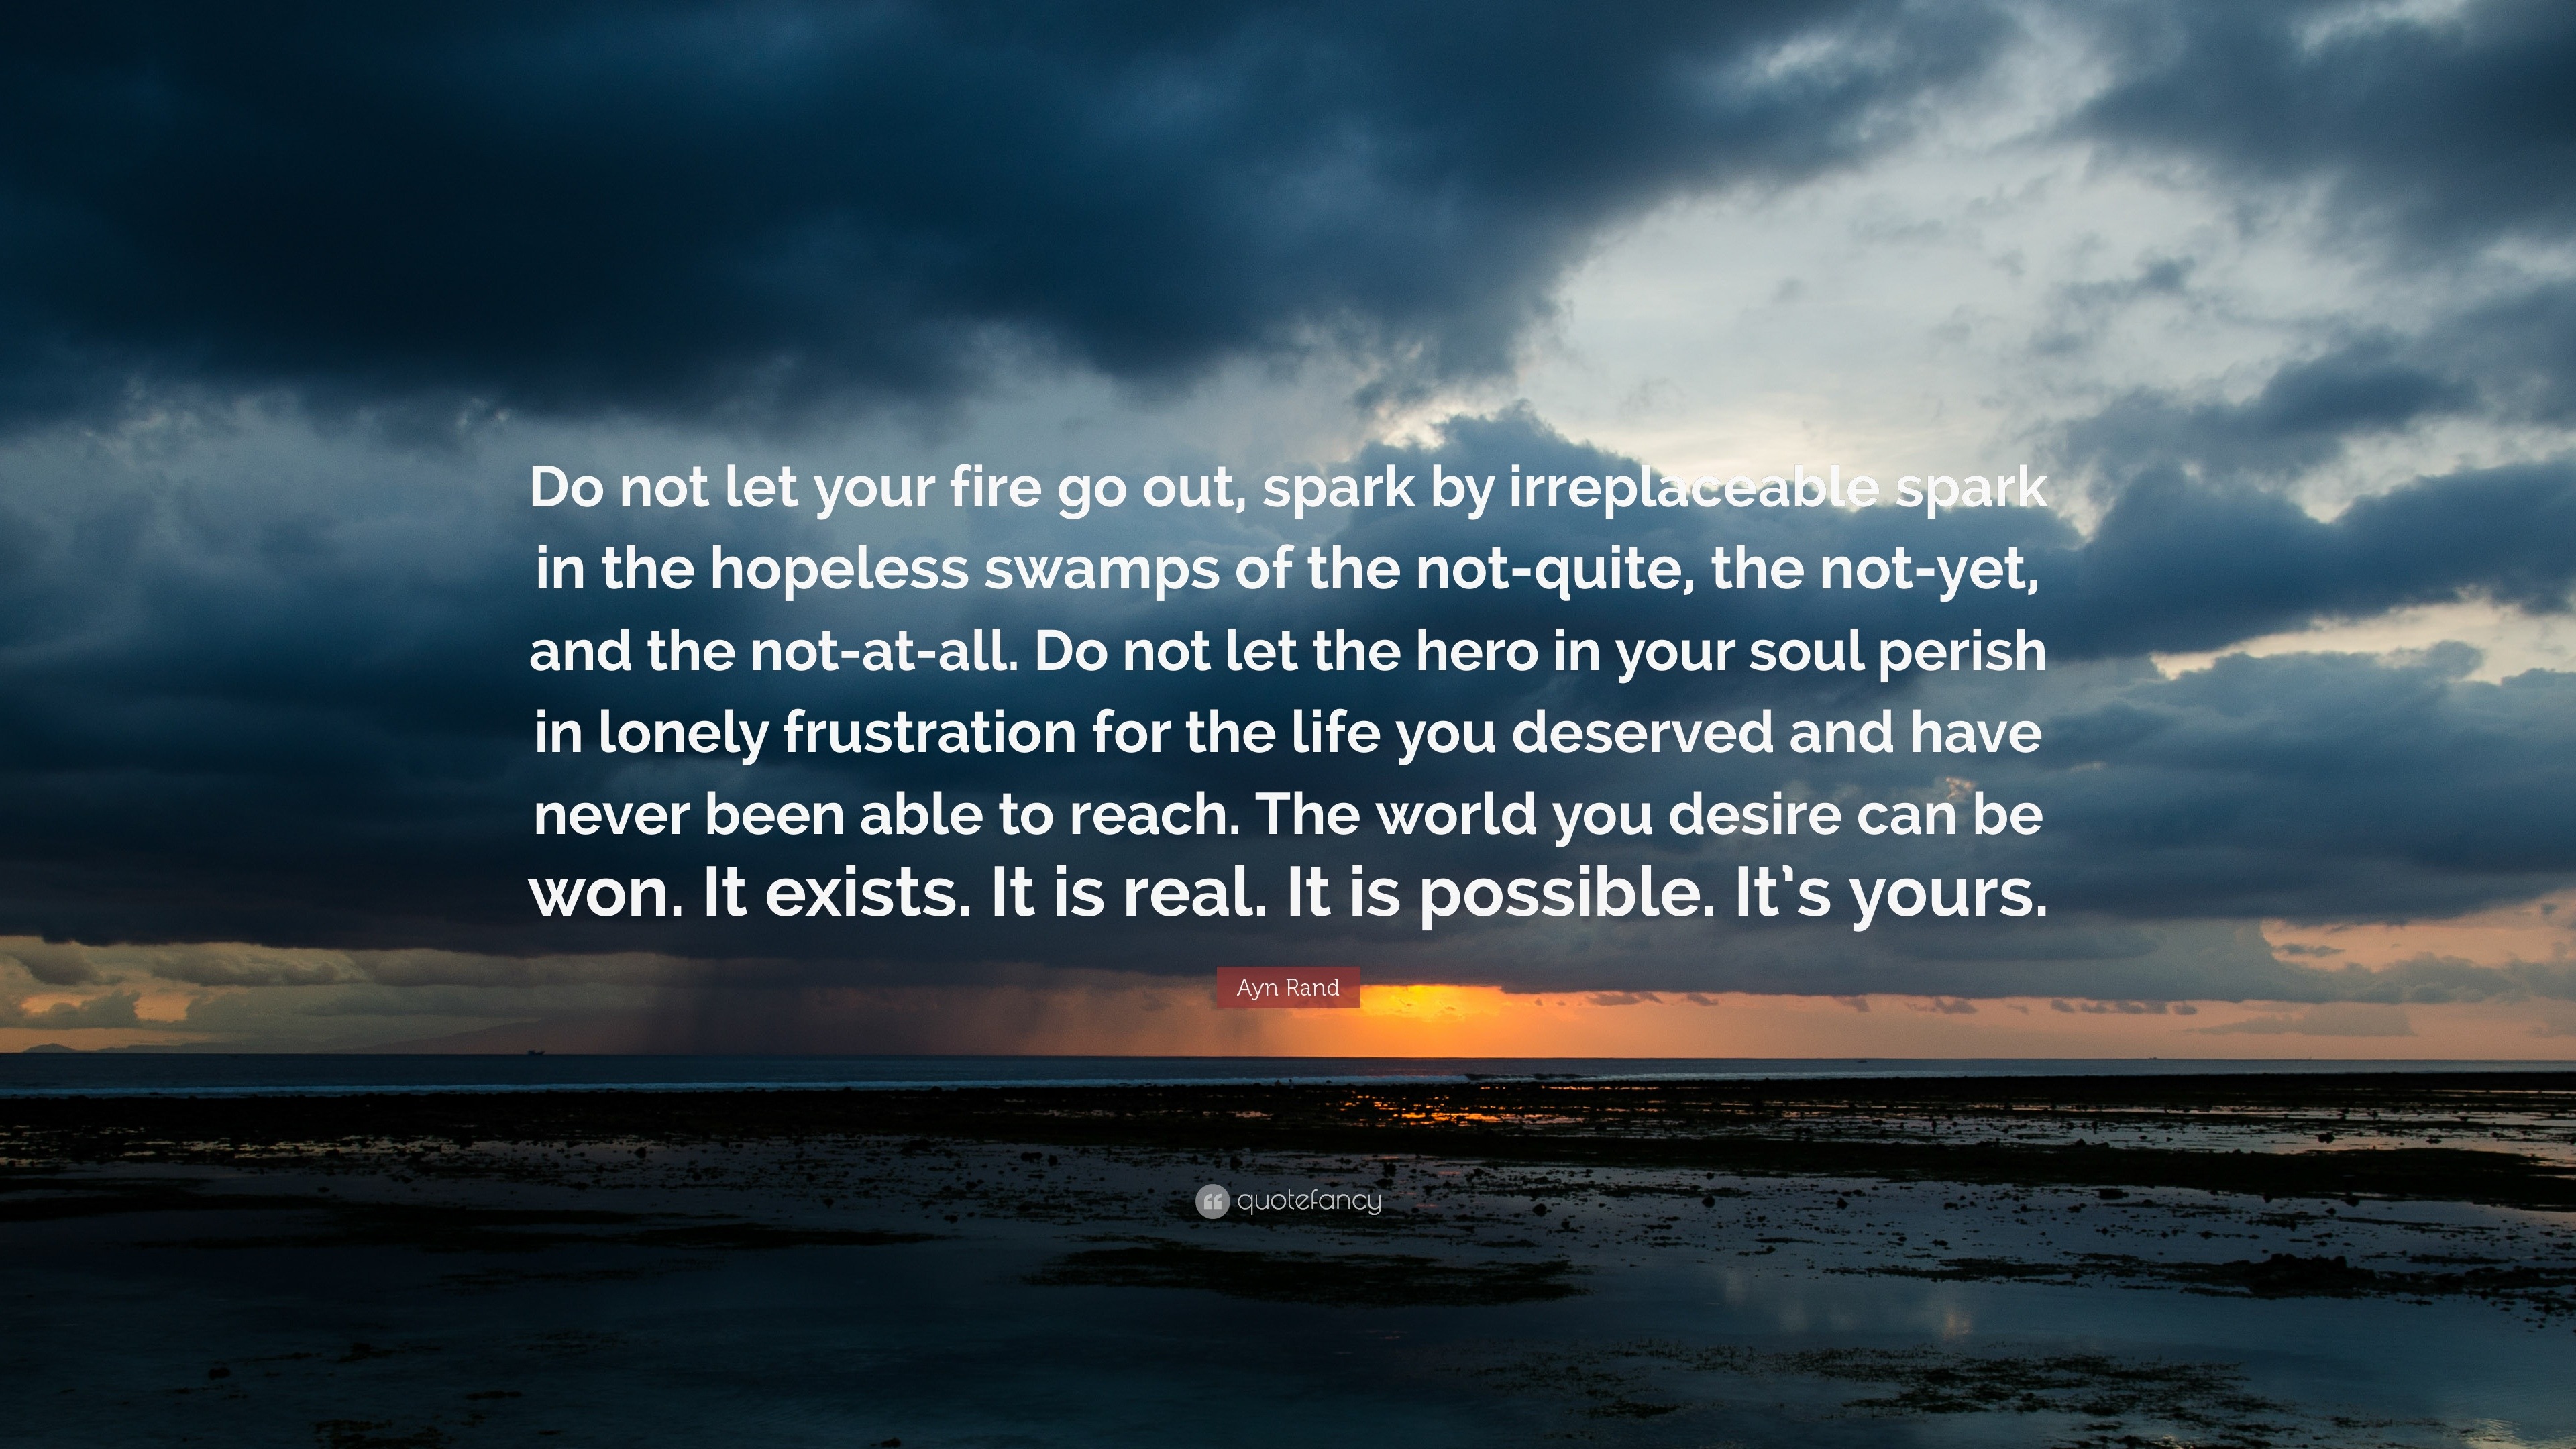 Ayn Rand Quote: “Do not let your fire go out, spark by irreplaceable